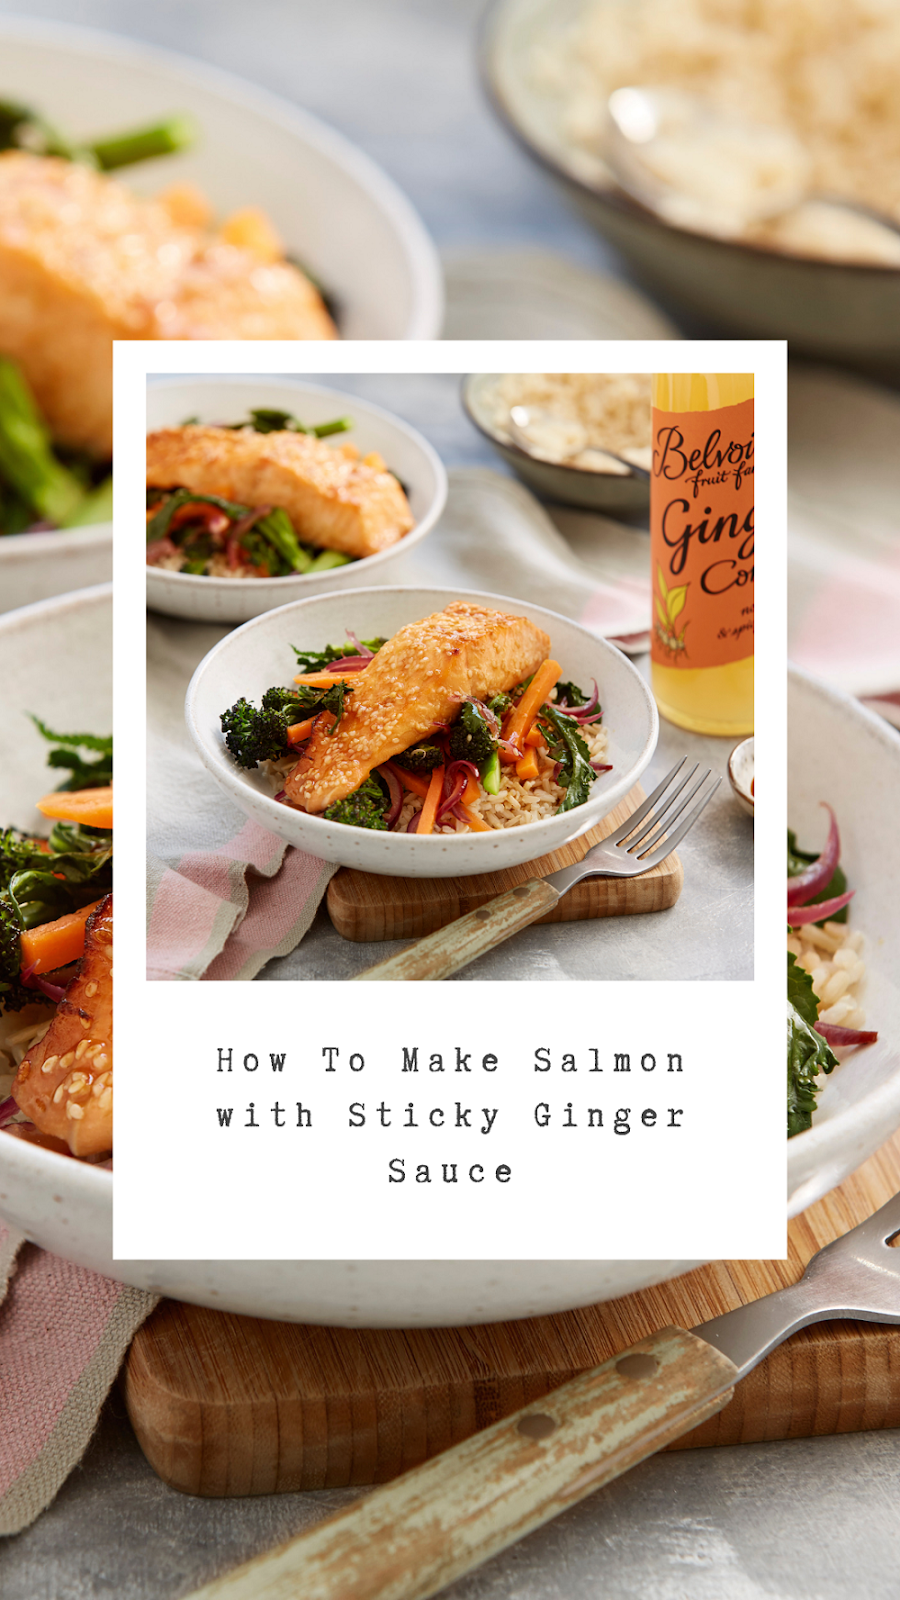 How To Make Salmon with Sticky Ginger Sauce